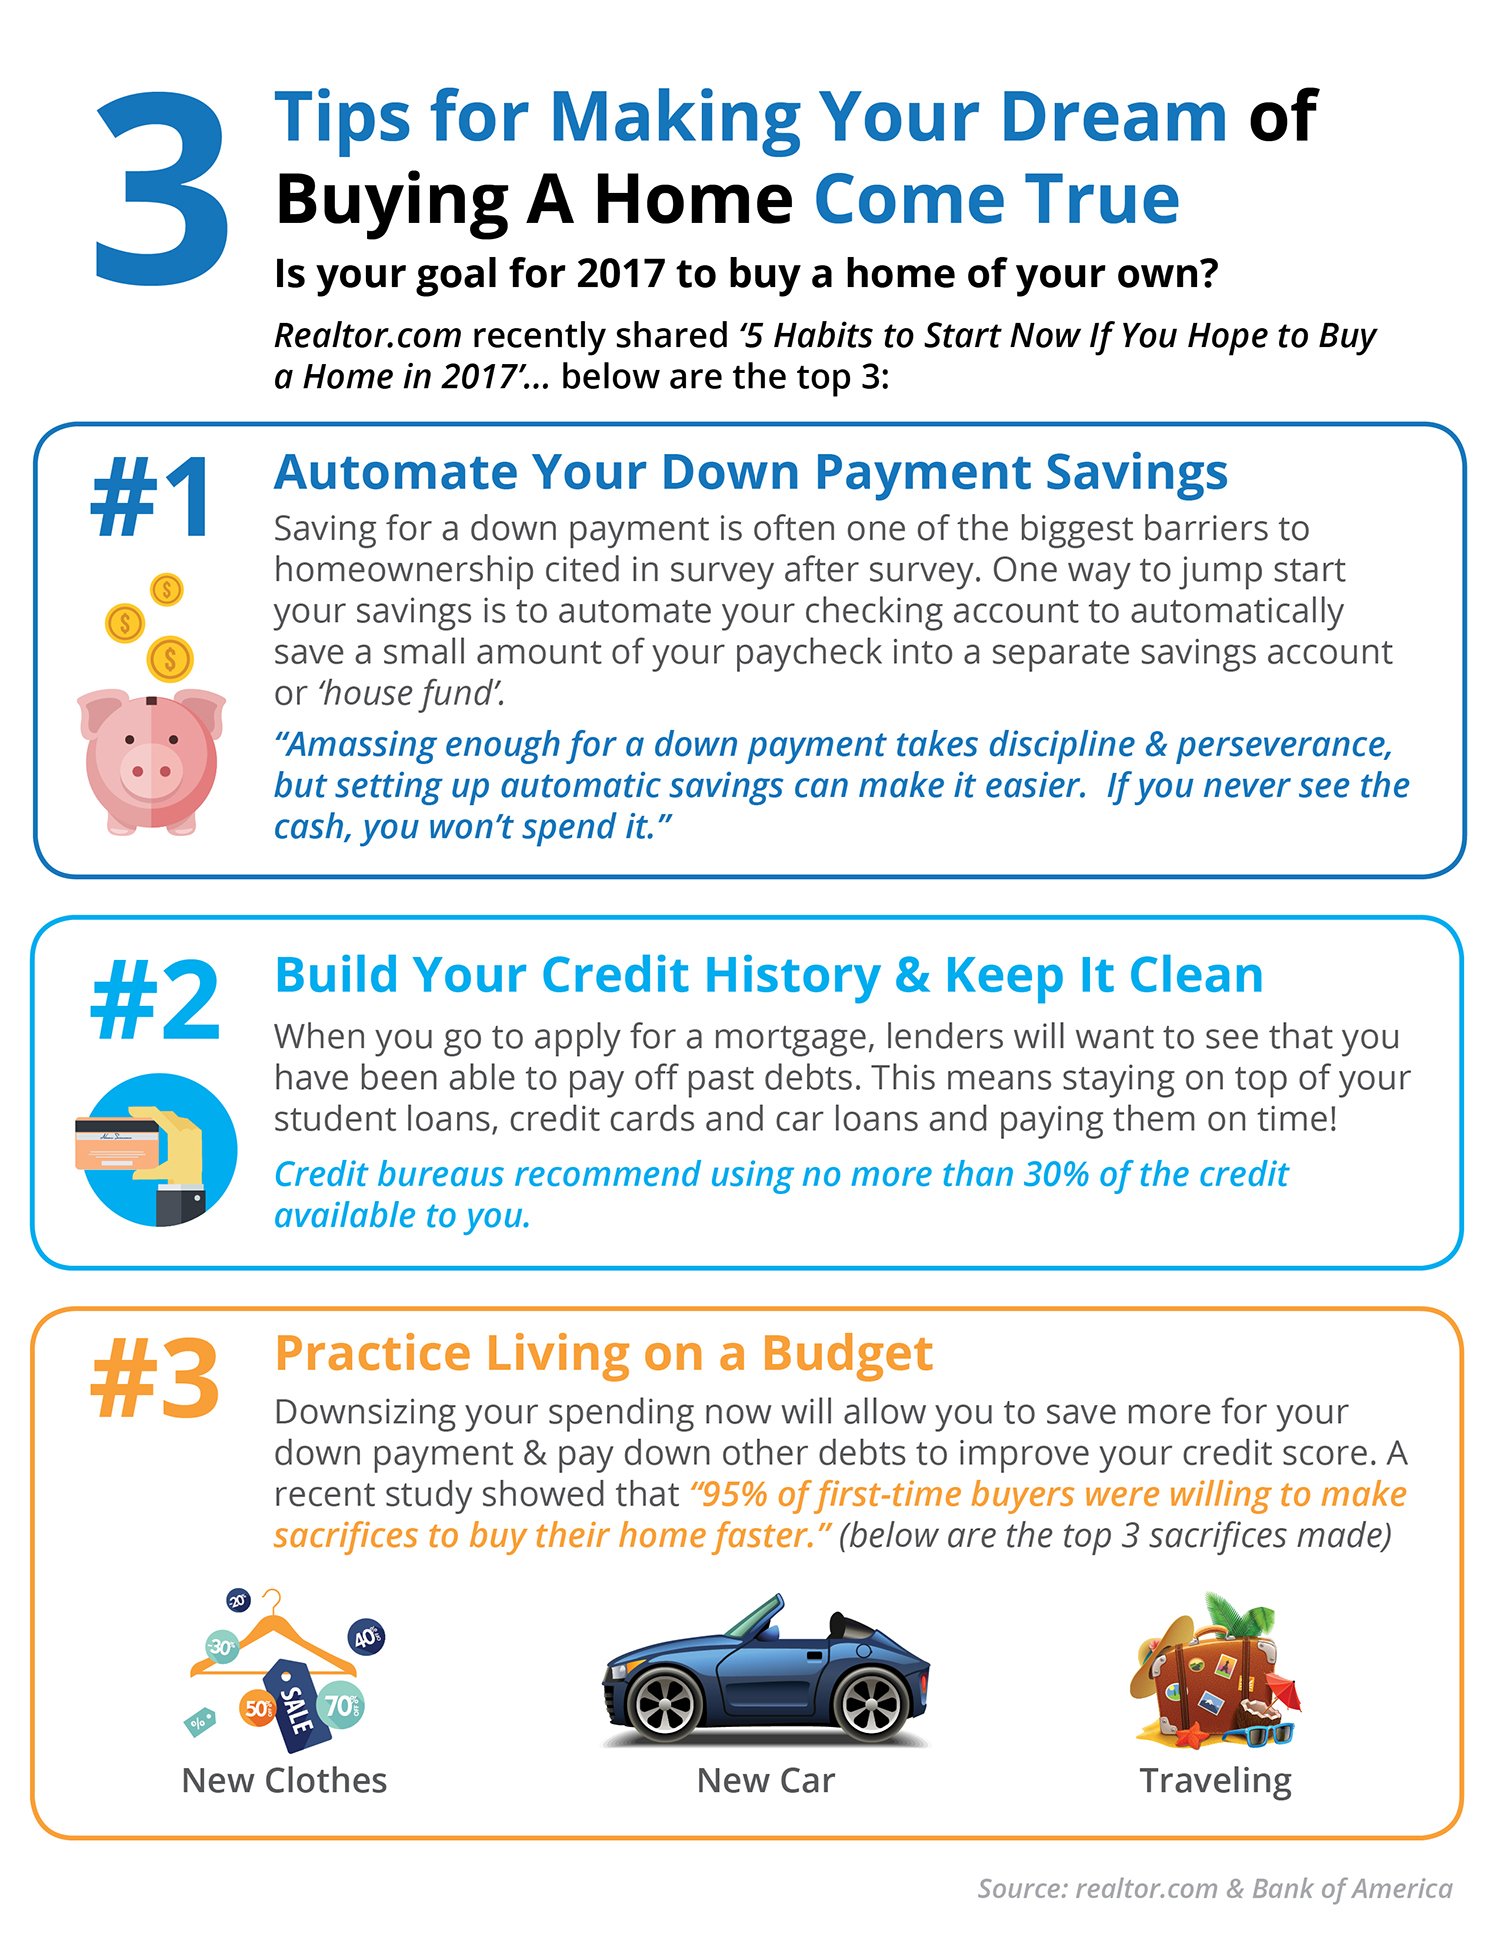 3 Tips for Making Your Dream of Buying a Home Come True [INFOGRAPHIC] | Simplifying The Market